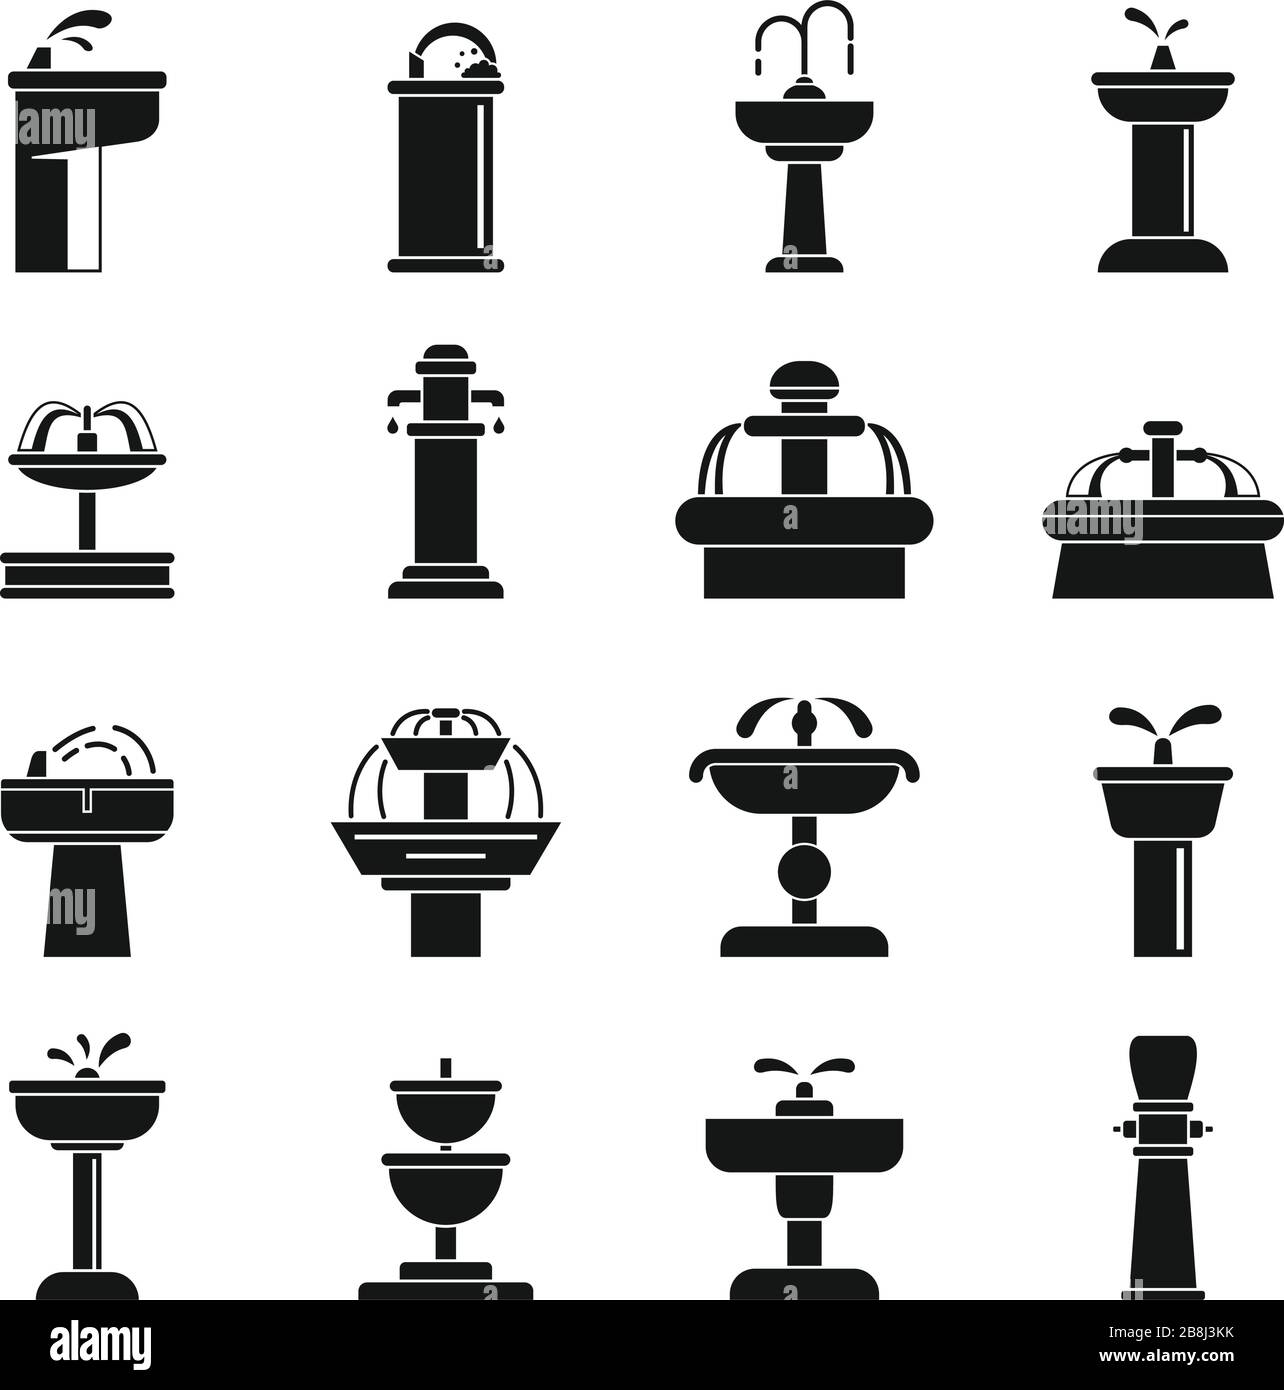 City drinking fountain icons set. Simple set of city drinking fountain vector icons for web design on white background Stock Vector